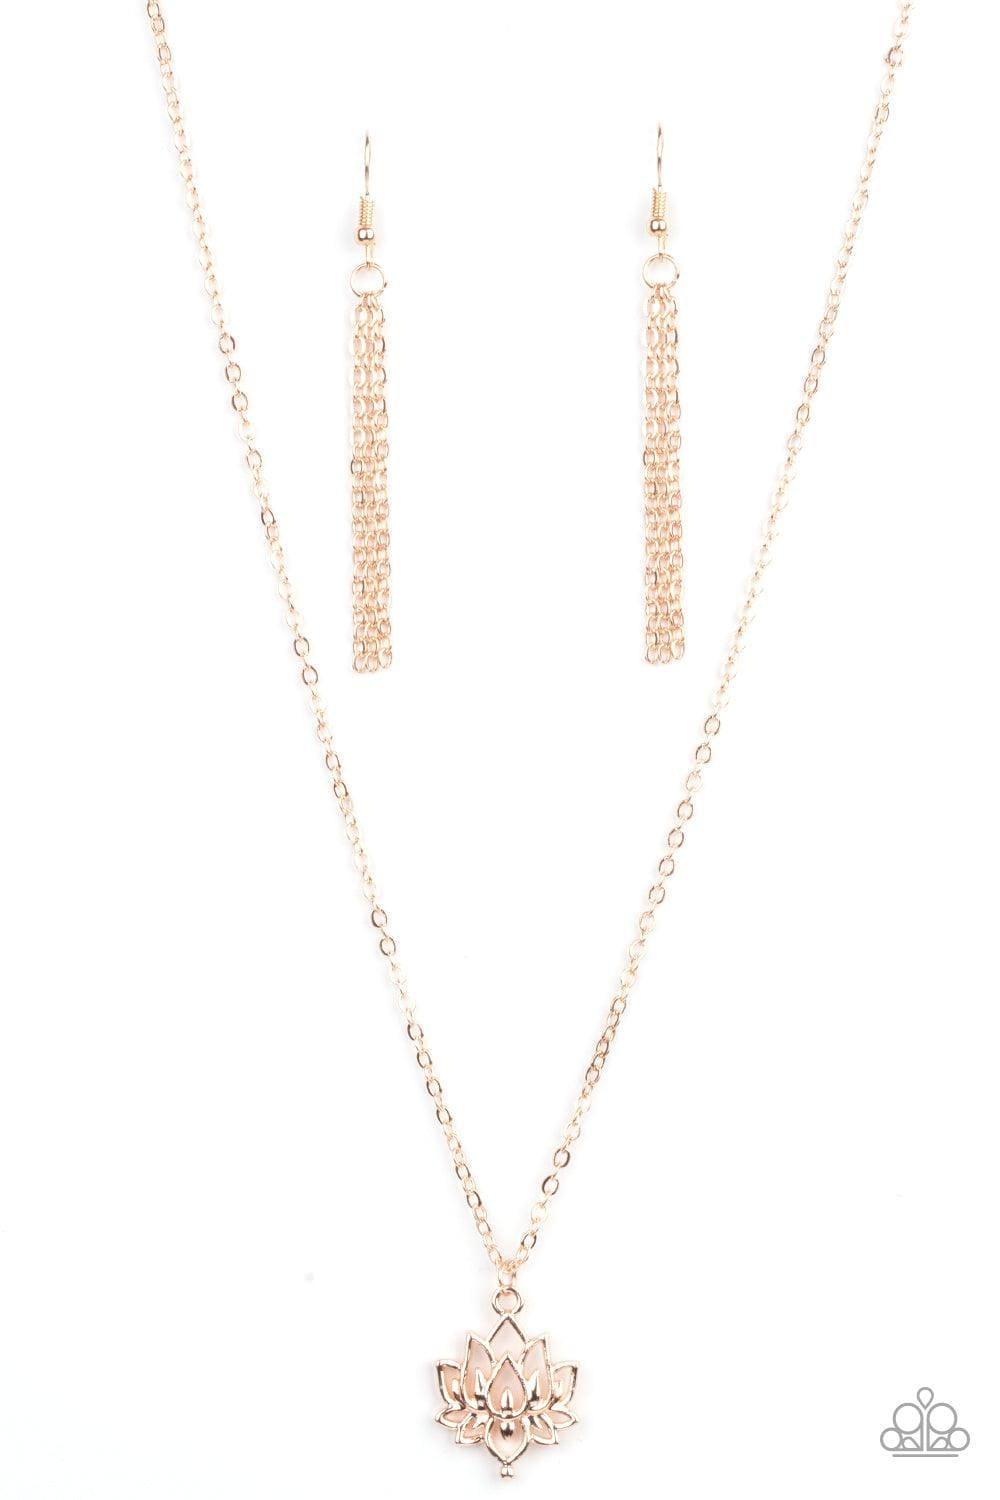 Paparazzi Accessories - Lotus Retreat - Rose Gold Dainty Necklace - Bling by JessieK